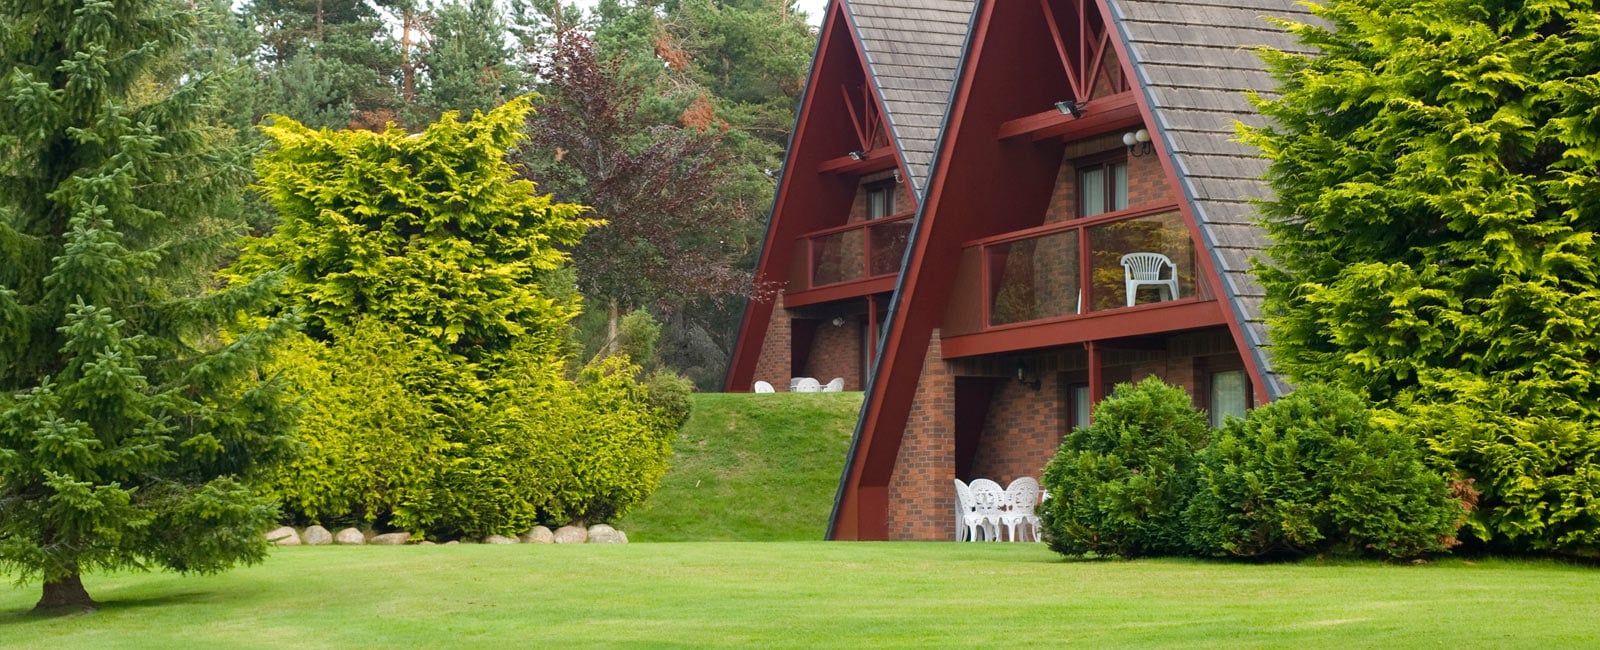 Exterior of Hilton Grand Vacations Club at Coylumbridge in Inverness-shire, Scotland